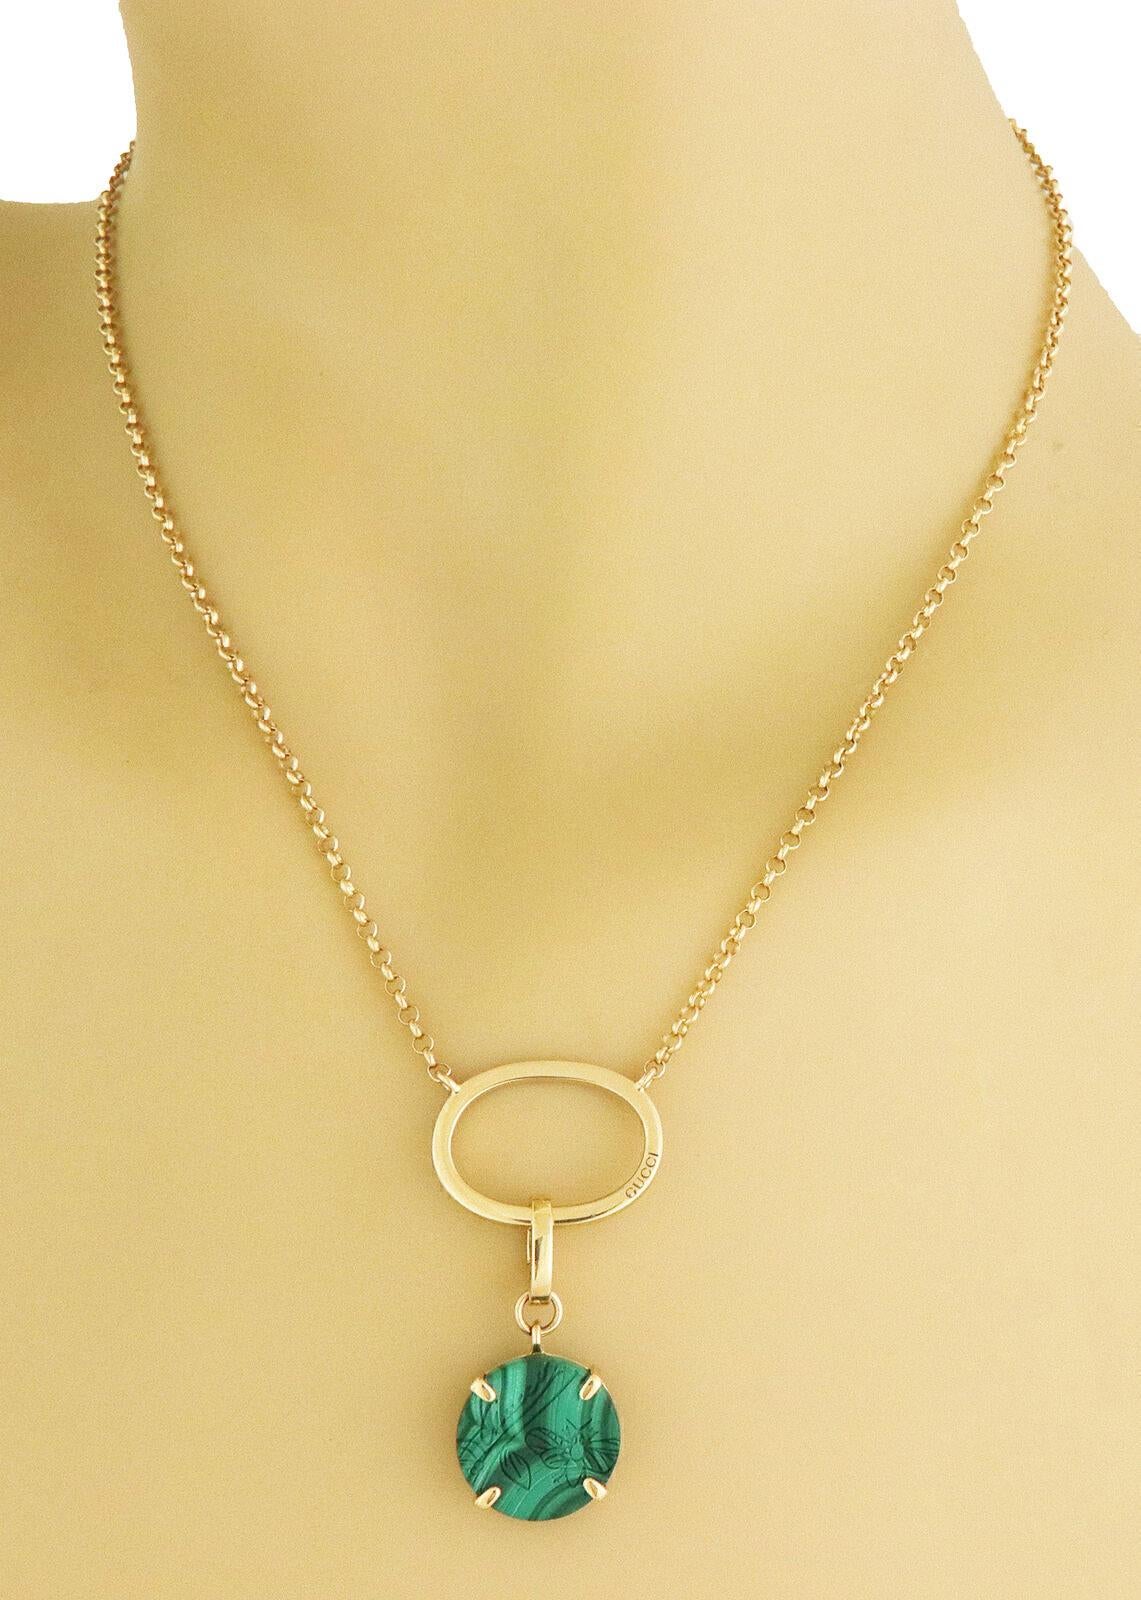 Women's Gucci Malachite 18k Yellow Gold Beetle Necklace  For Sale